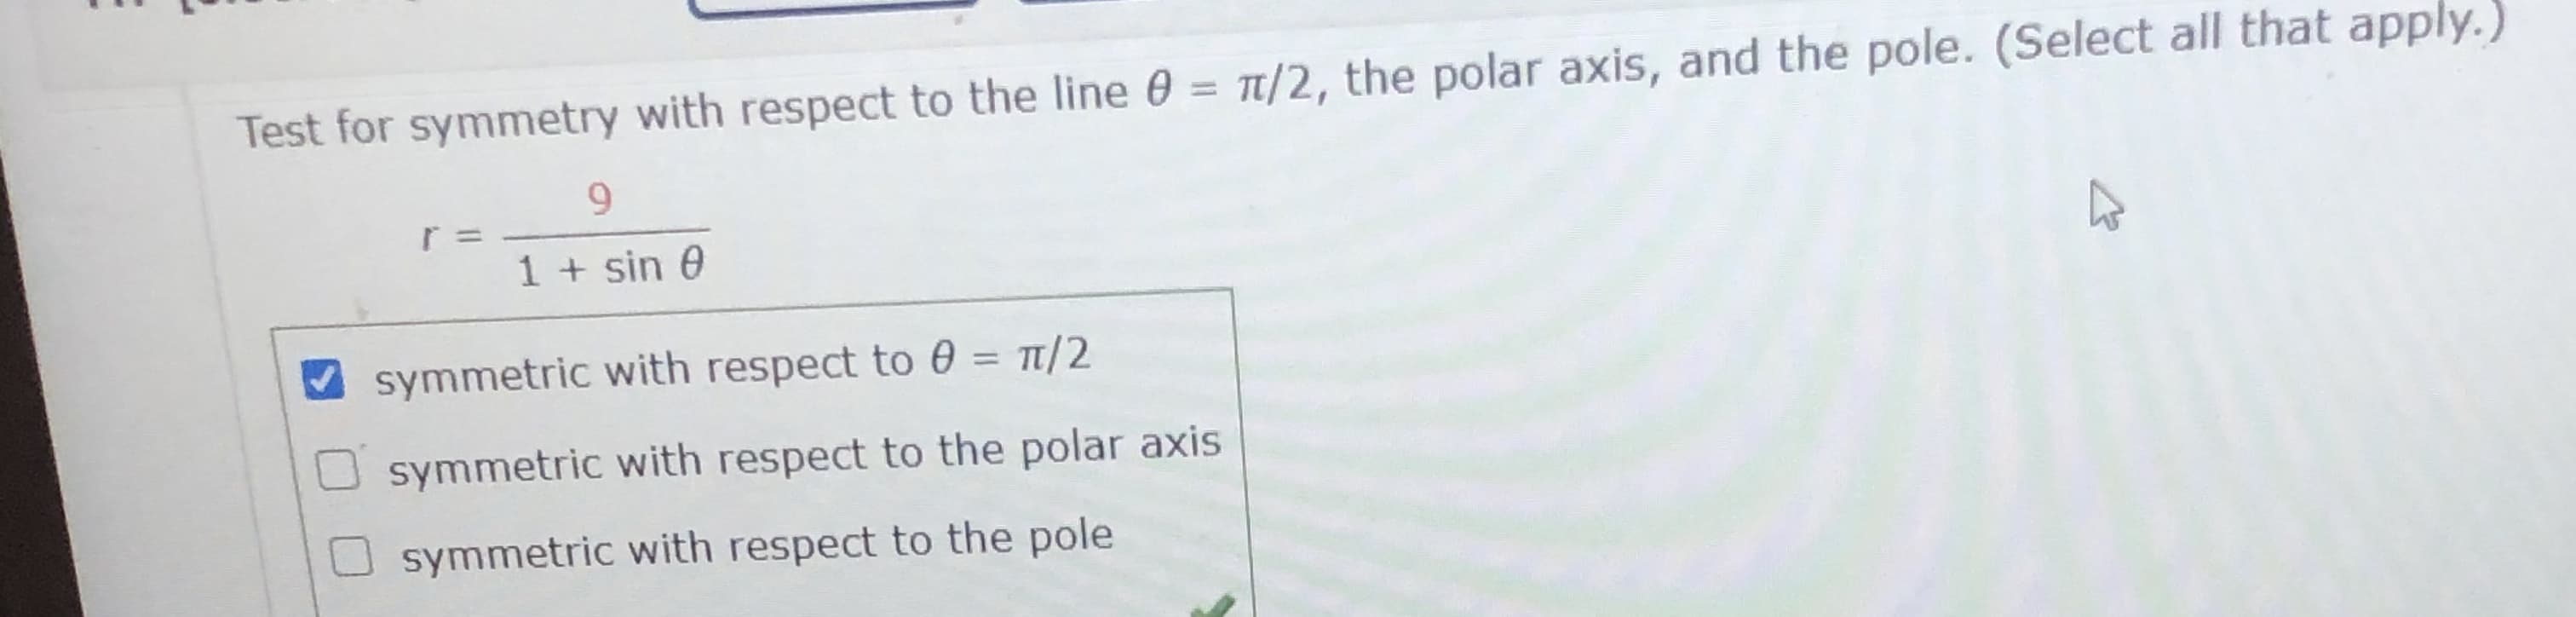 Test for symmetry with respect to the line 0 = t/2, the polar axis, and the pole. (Select all that apply.)
%3D
9.
1 + sin 0
symmetric with respect to 0 = 1/2
%3D
symmetric with respect to the polar axis
symmetric with respect to the pole
